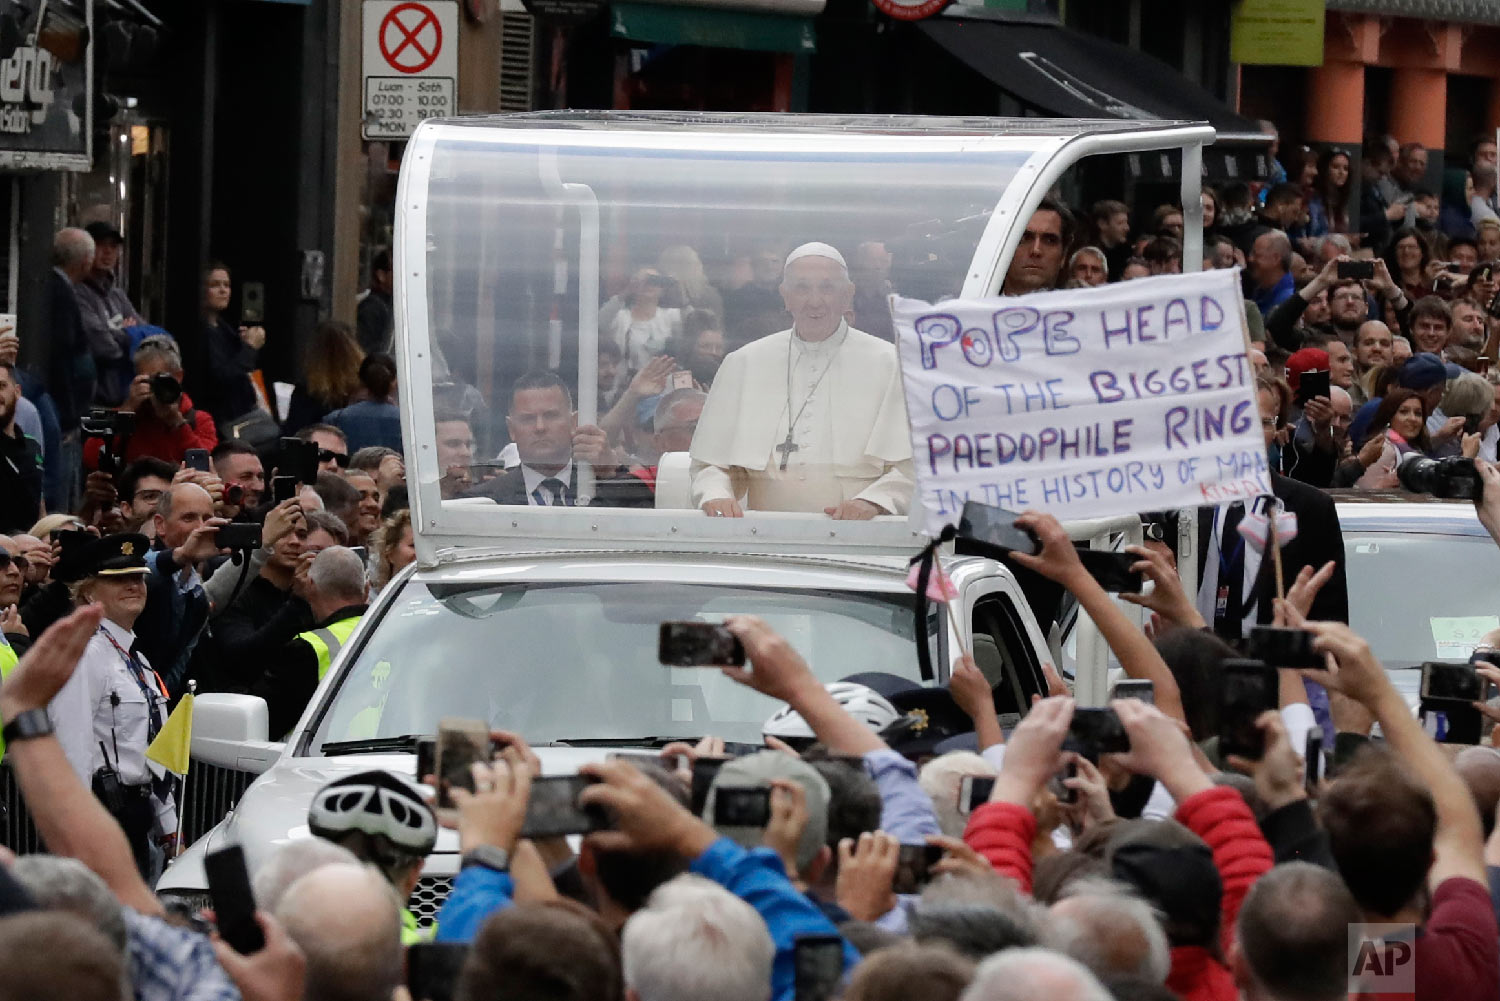  Pope Francis passes by a banner of a protester as he leaves after visiting St Mary's Pro-Cathedral, in Dublin, Ireland. Pope Francis is on a two-day visit to Ireland on Aug. 25, 2018. (AP Photo/Matt Dunham) 